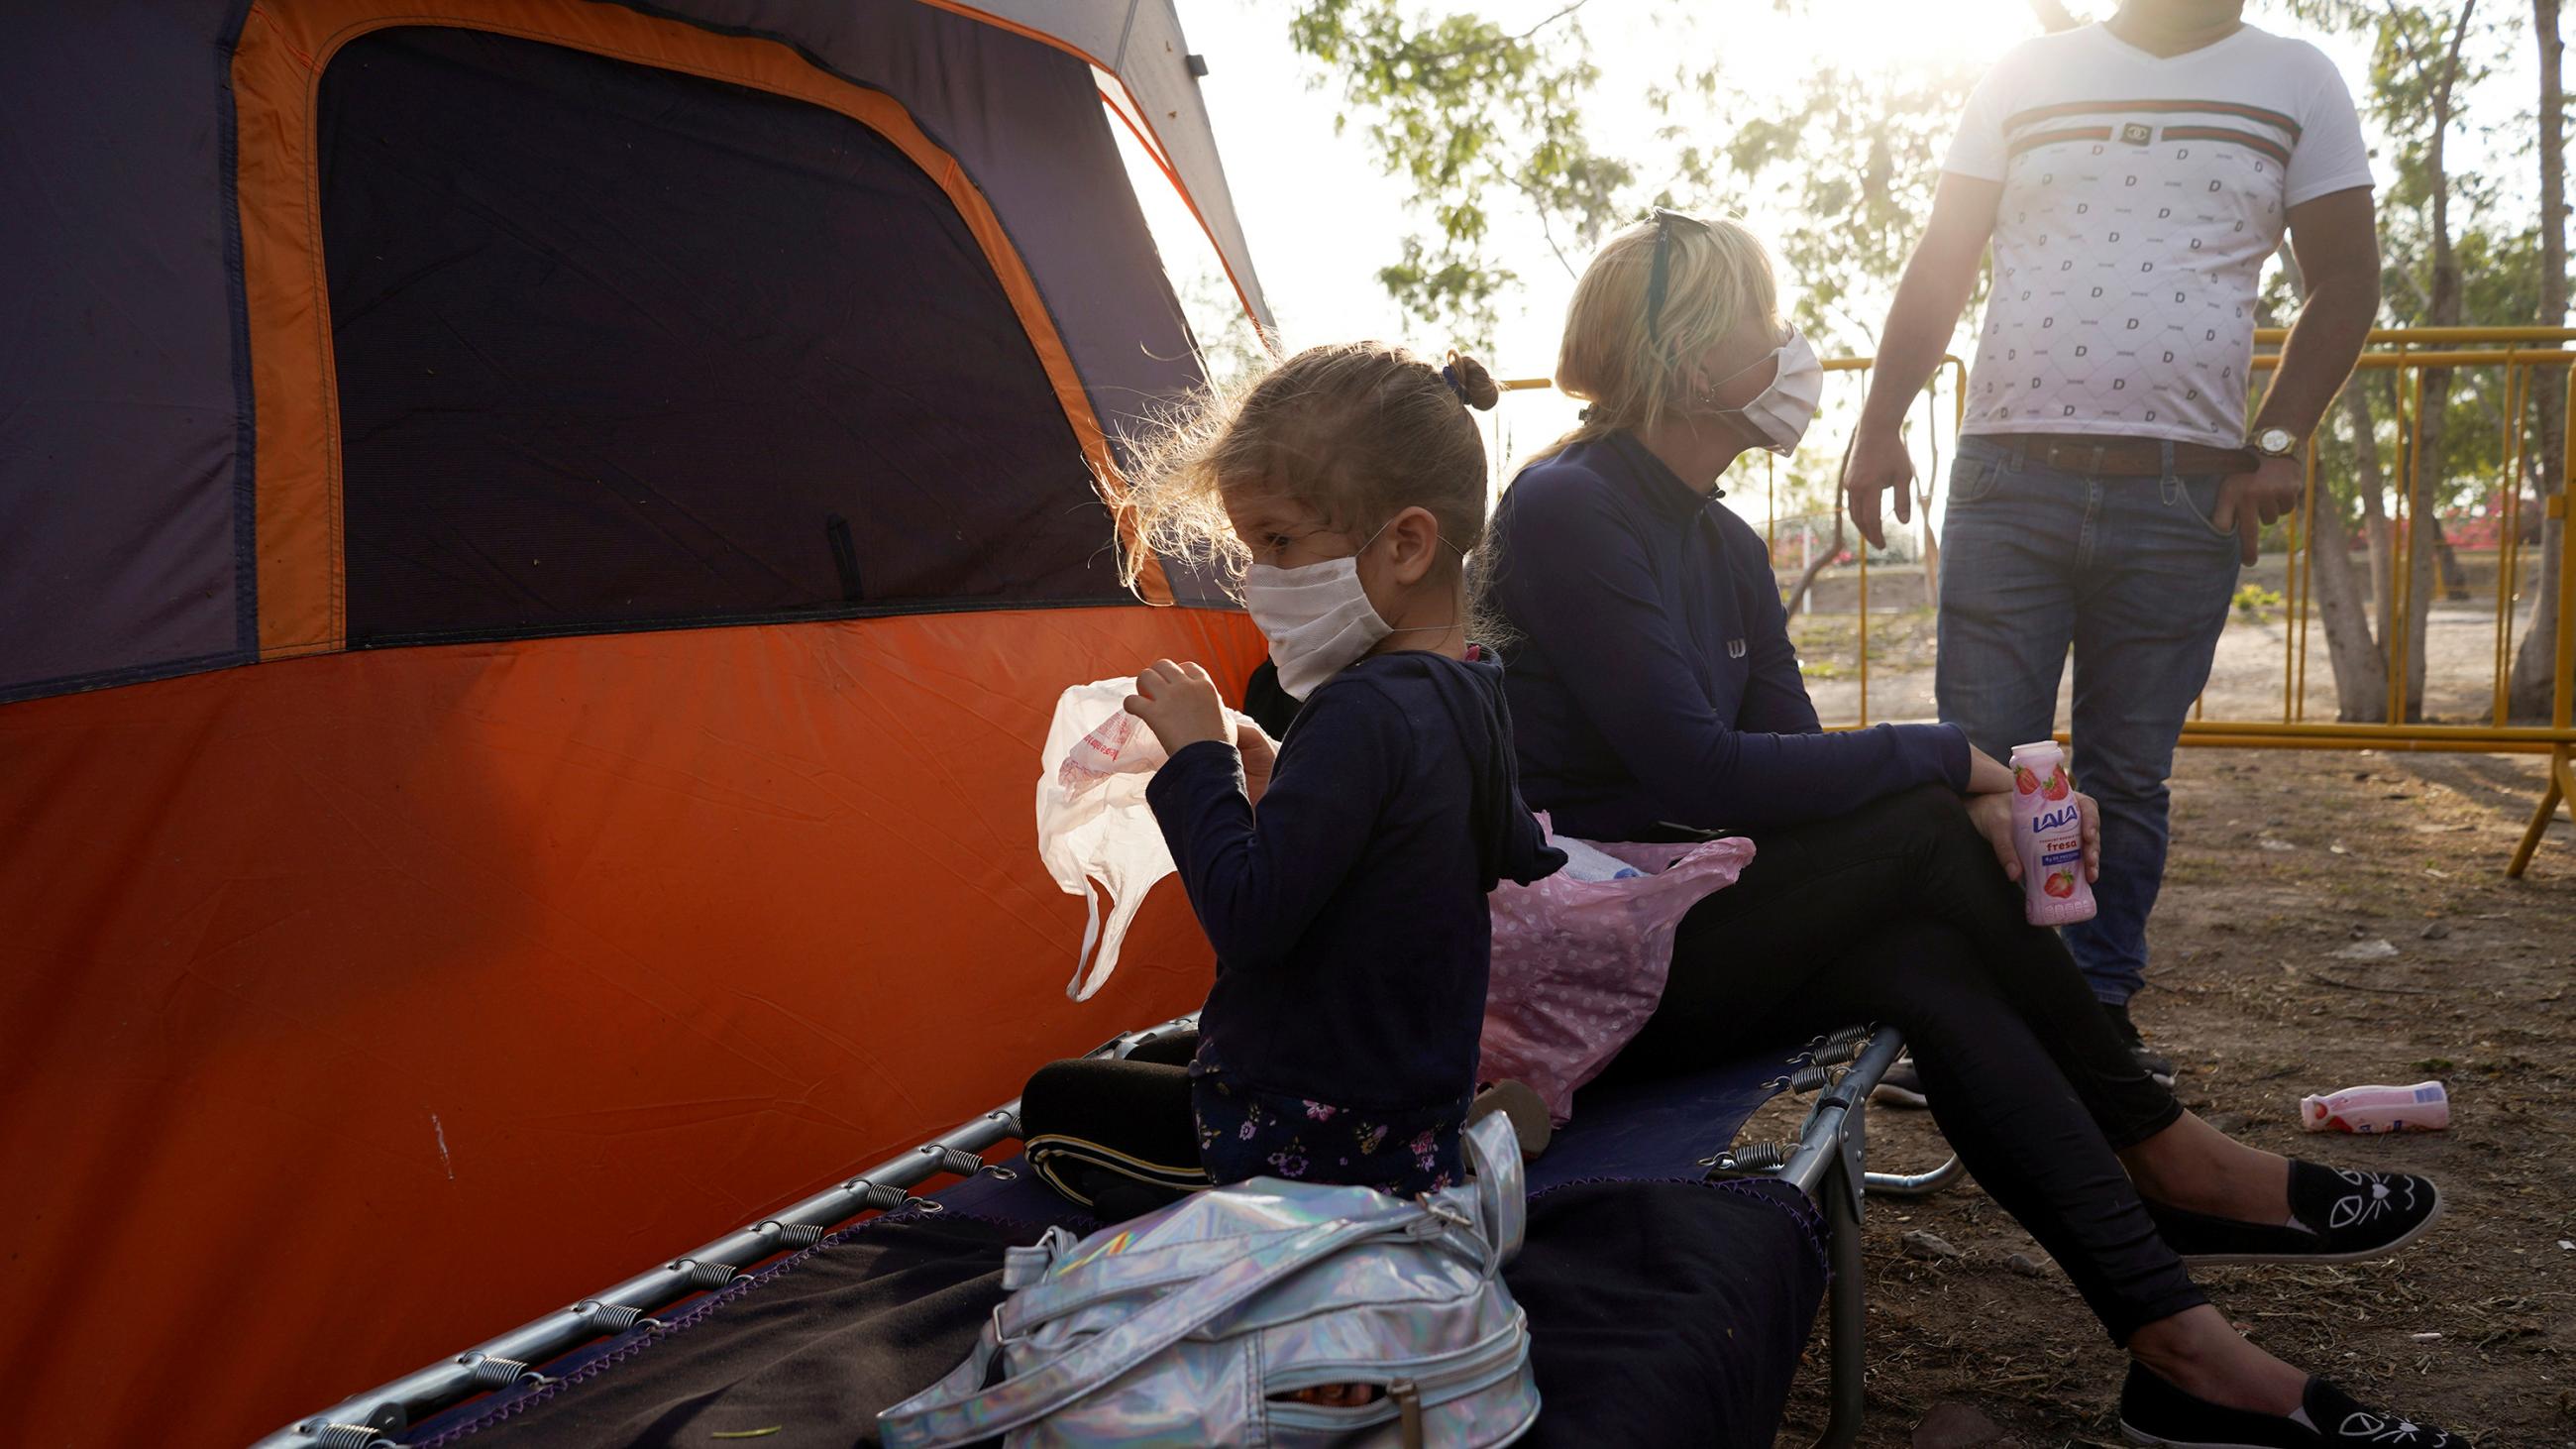 The photo shows the mother and daughter outside a tent in the morning hours with the rising sun brightly illuminating the top of the frame. Mother holds a strawberry drink and talks to a man whose head is out of the frame. Daughter faces the other way and plays with a plastic shopping bag. 